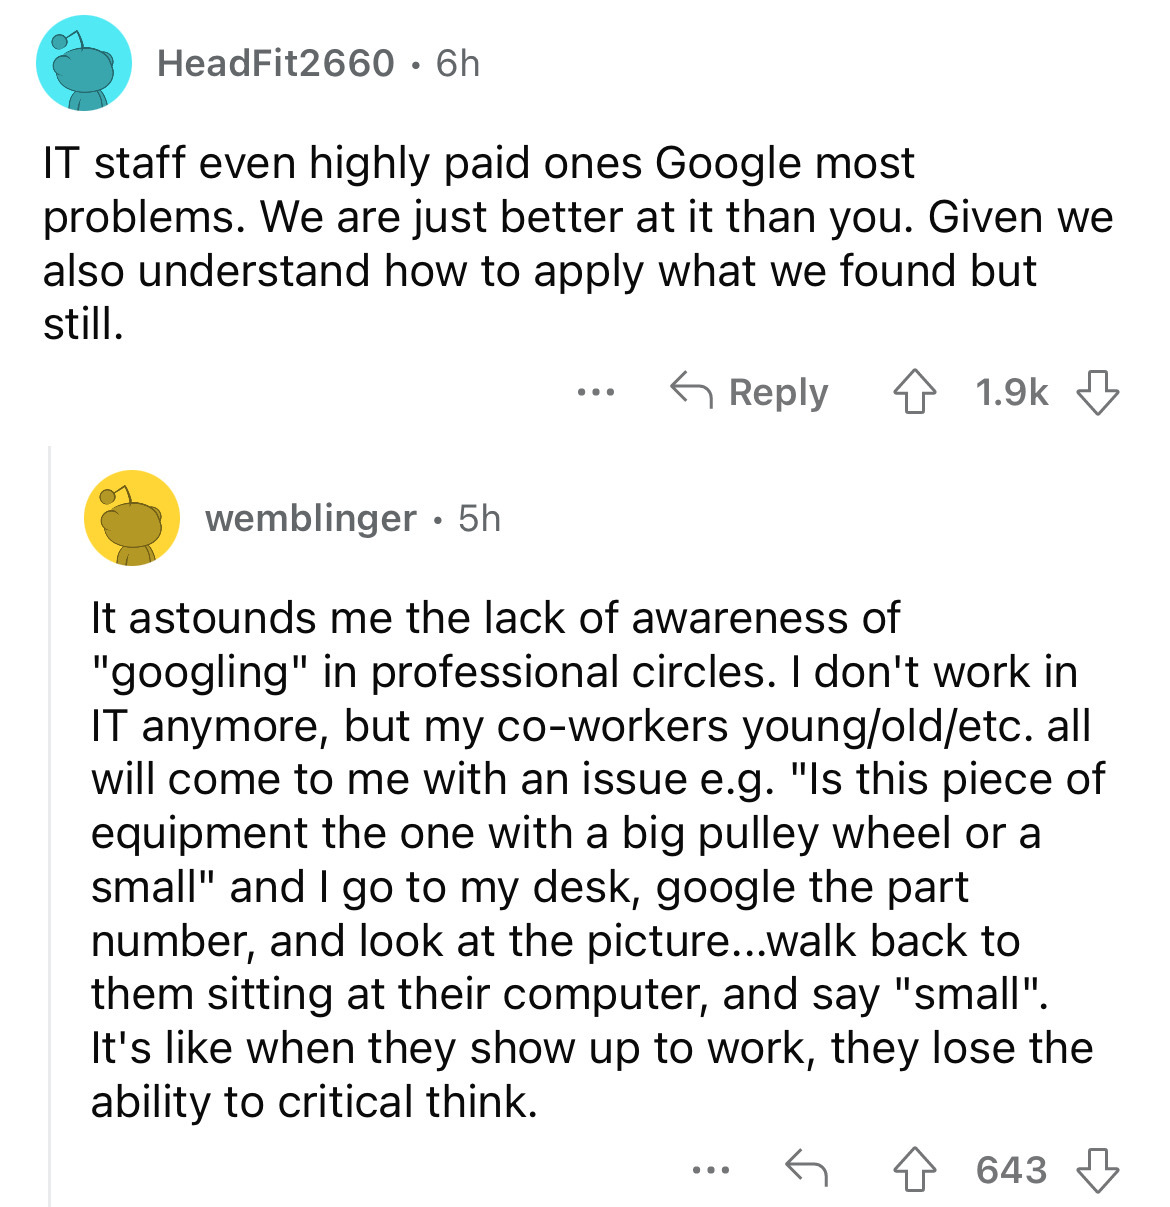 screenshot - HeadFit2660 6h It staff even highly paid ones Google most problems. We are just better at it than you. Given we also understand how to apply what we found but still. wemblinger 5h It astounds me the lack of awareness of "googling" in professi